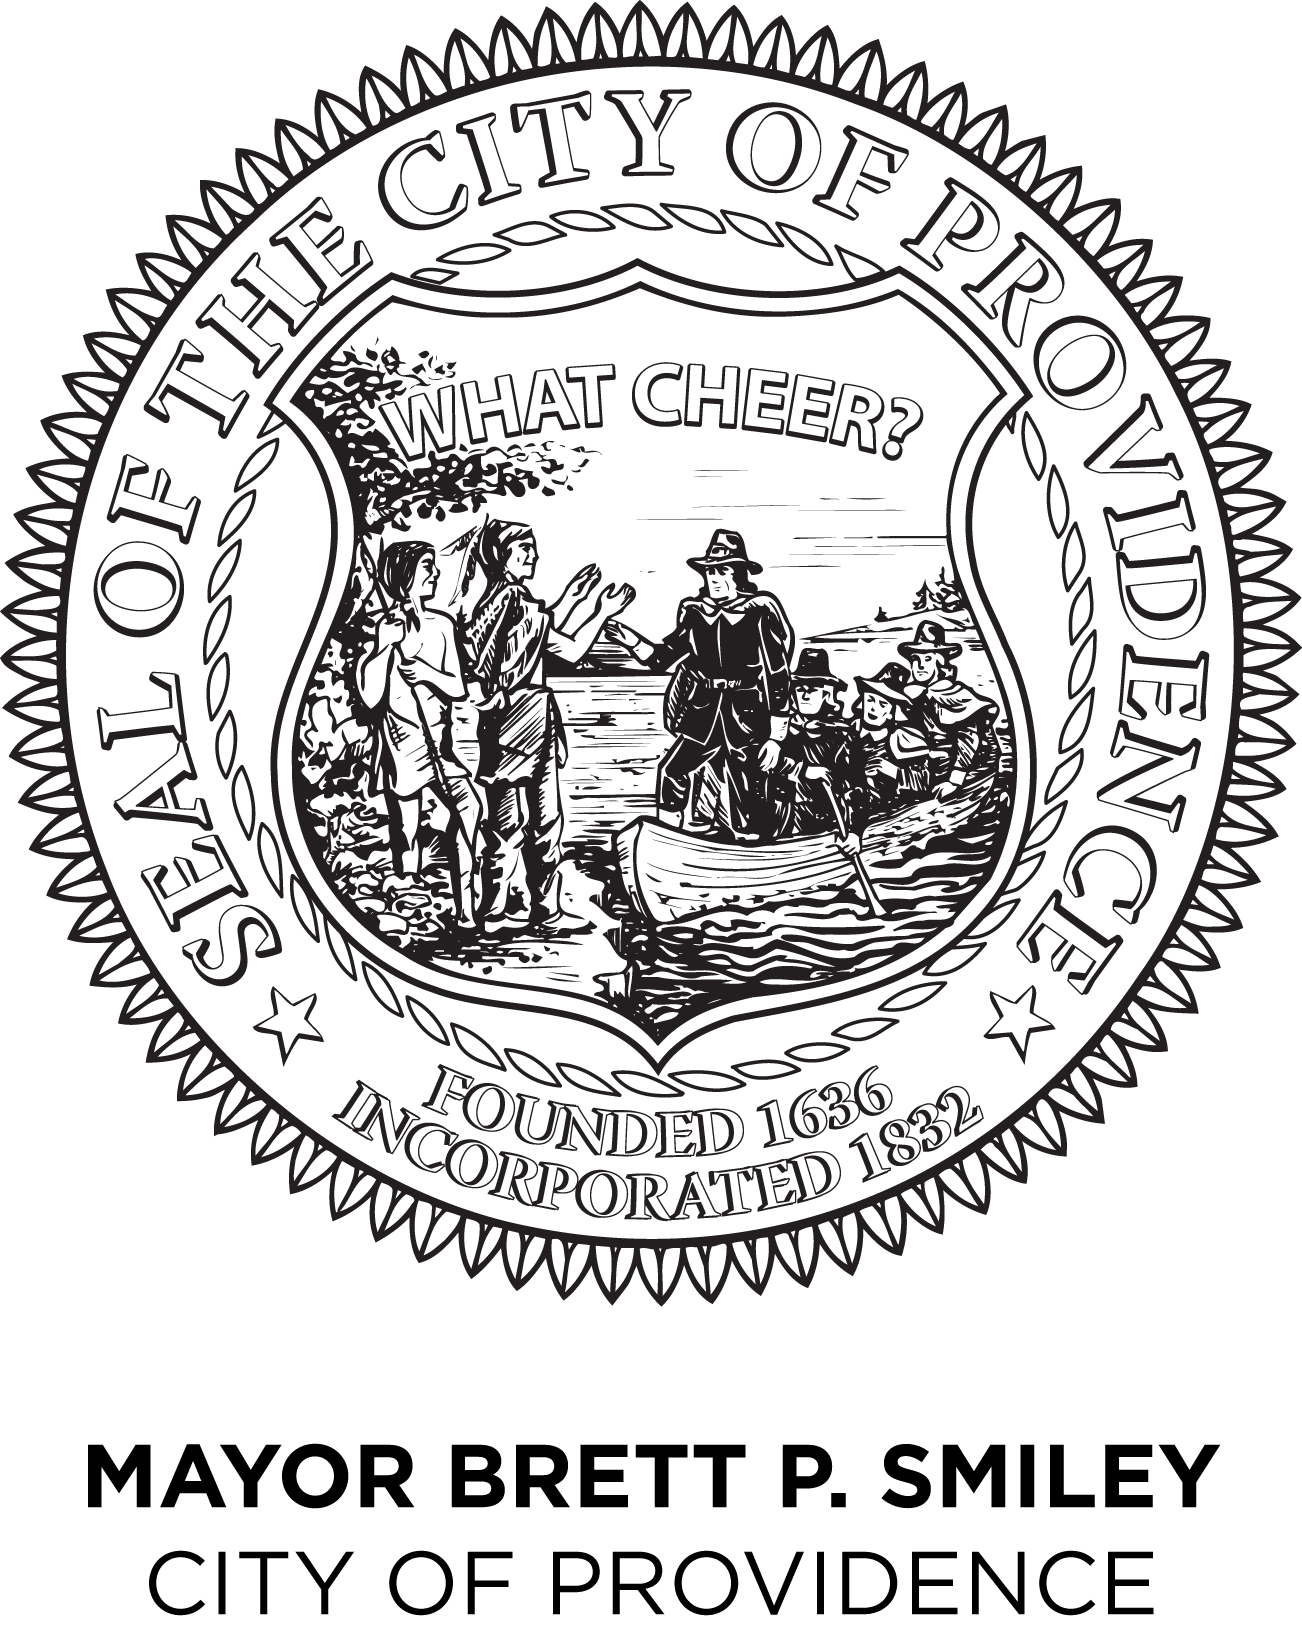 Providence City seal depicting when the city was founded and incorporated<br />
